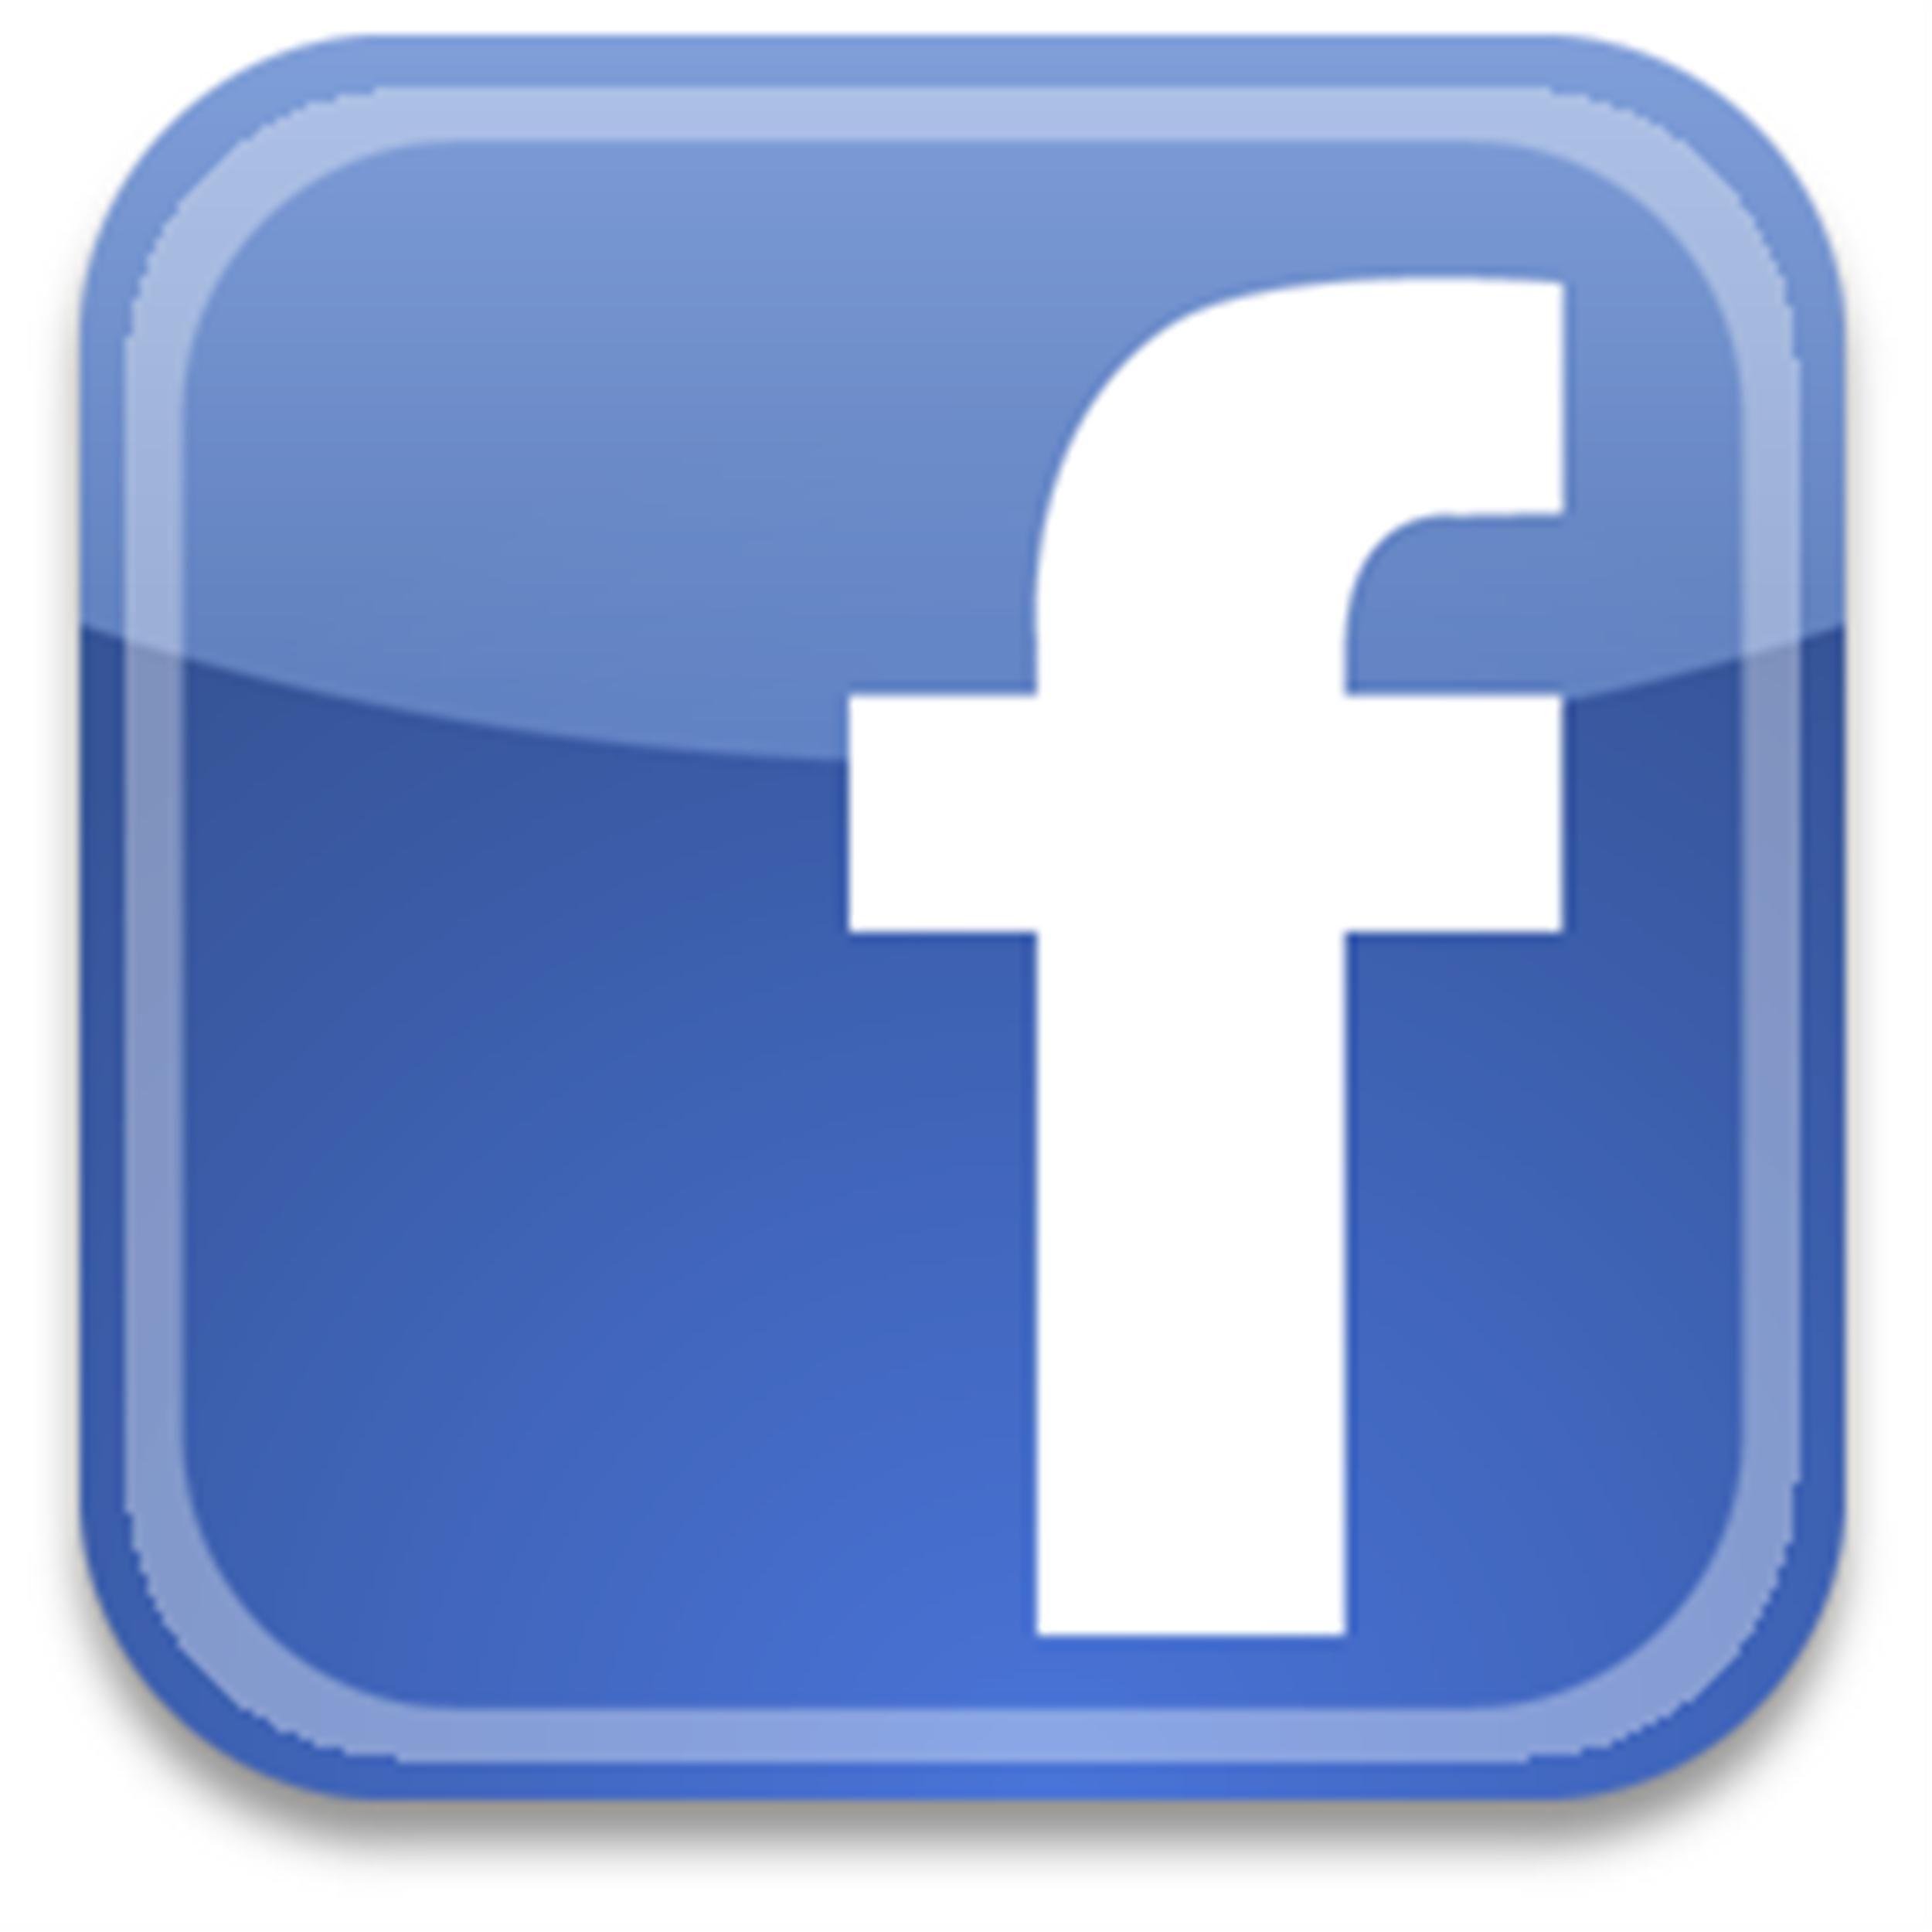 FB Logo - Fb facebook logo icon Icon and PNG Background